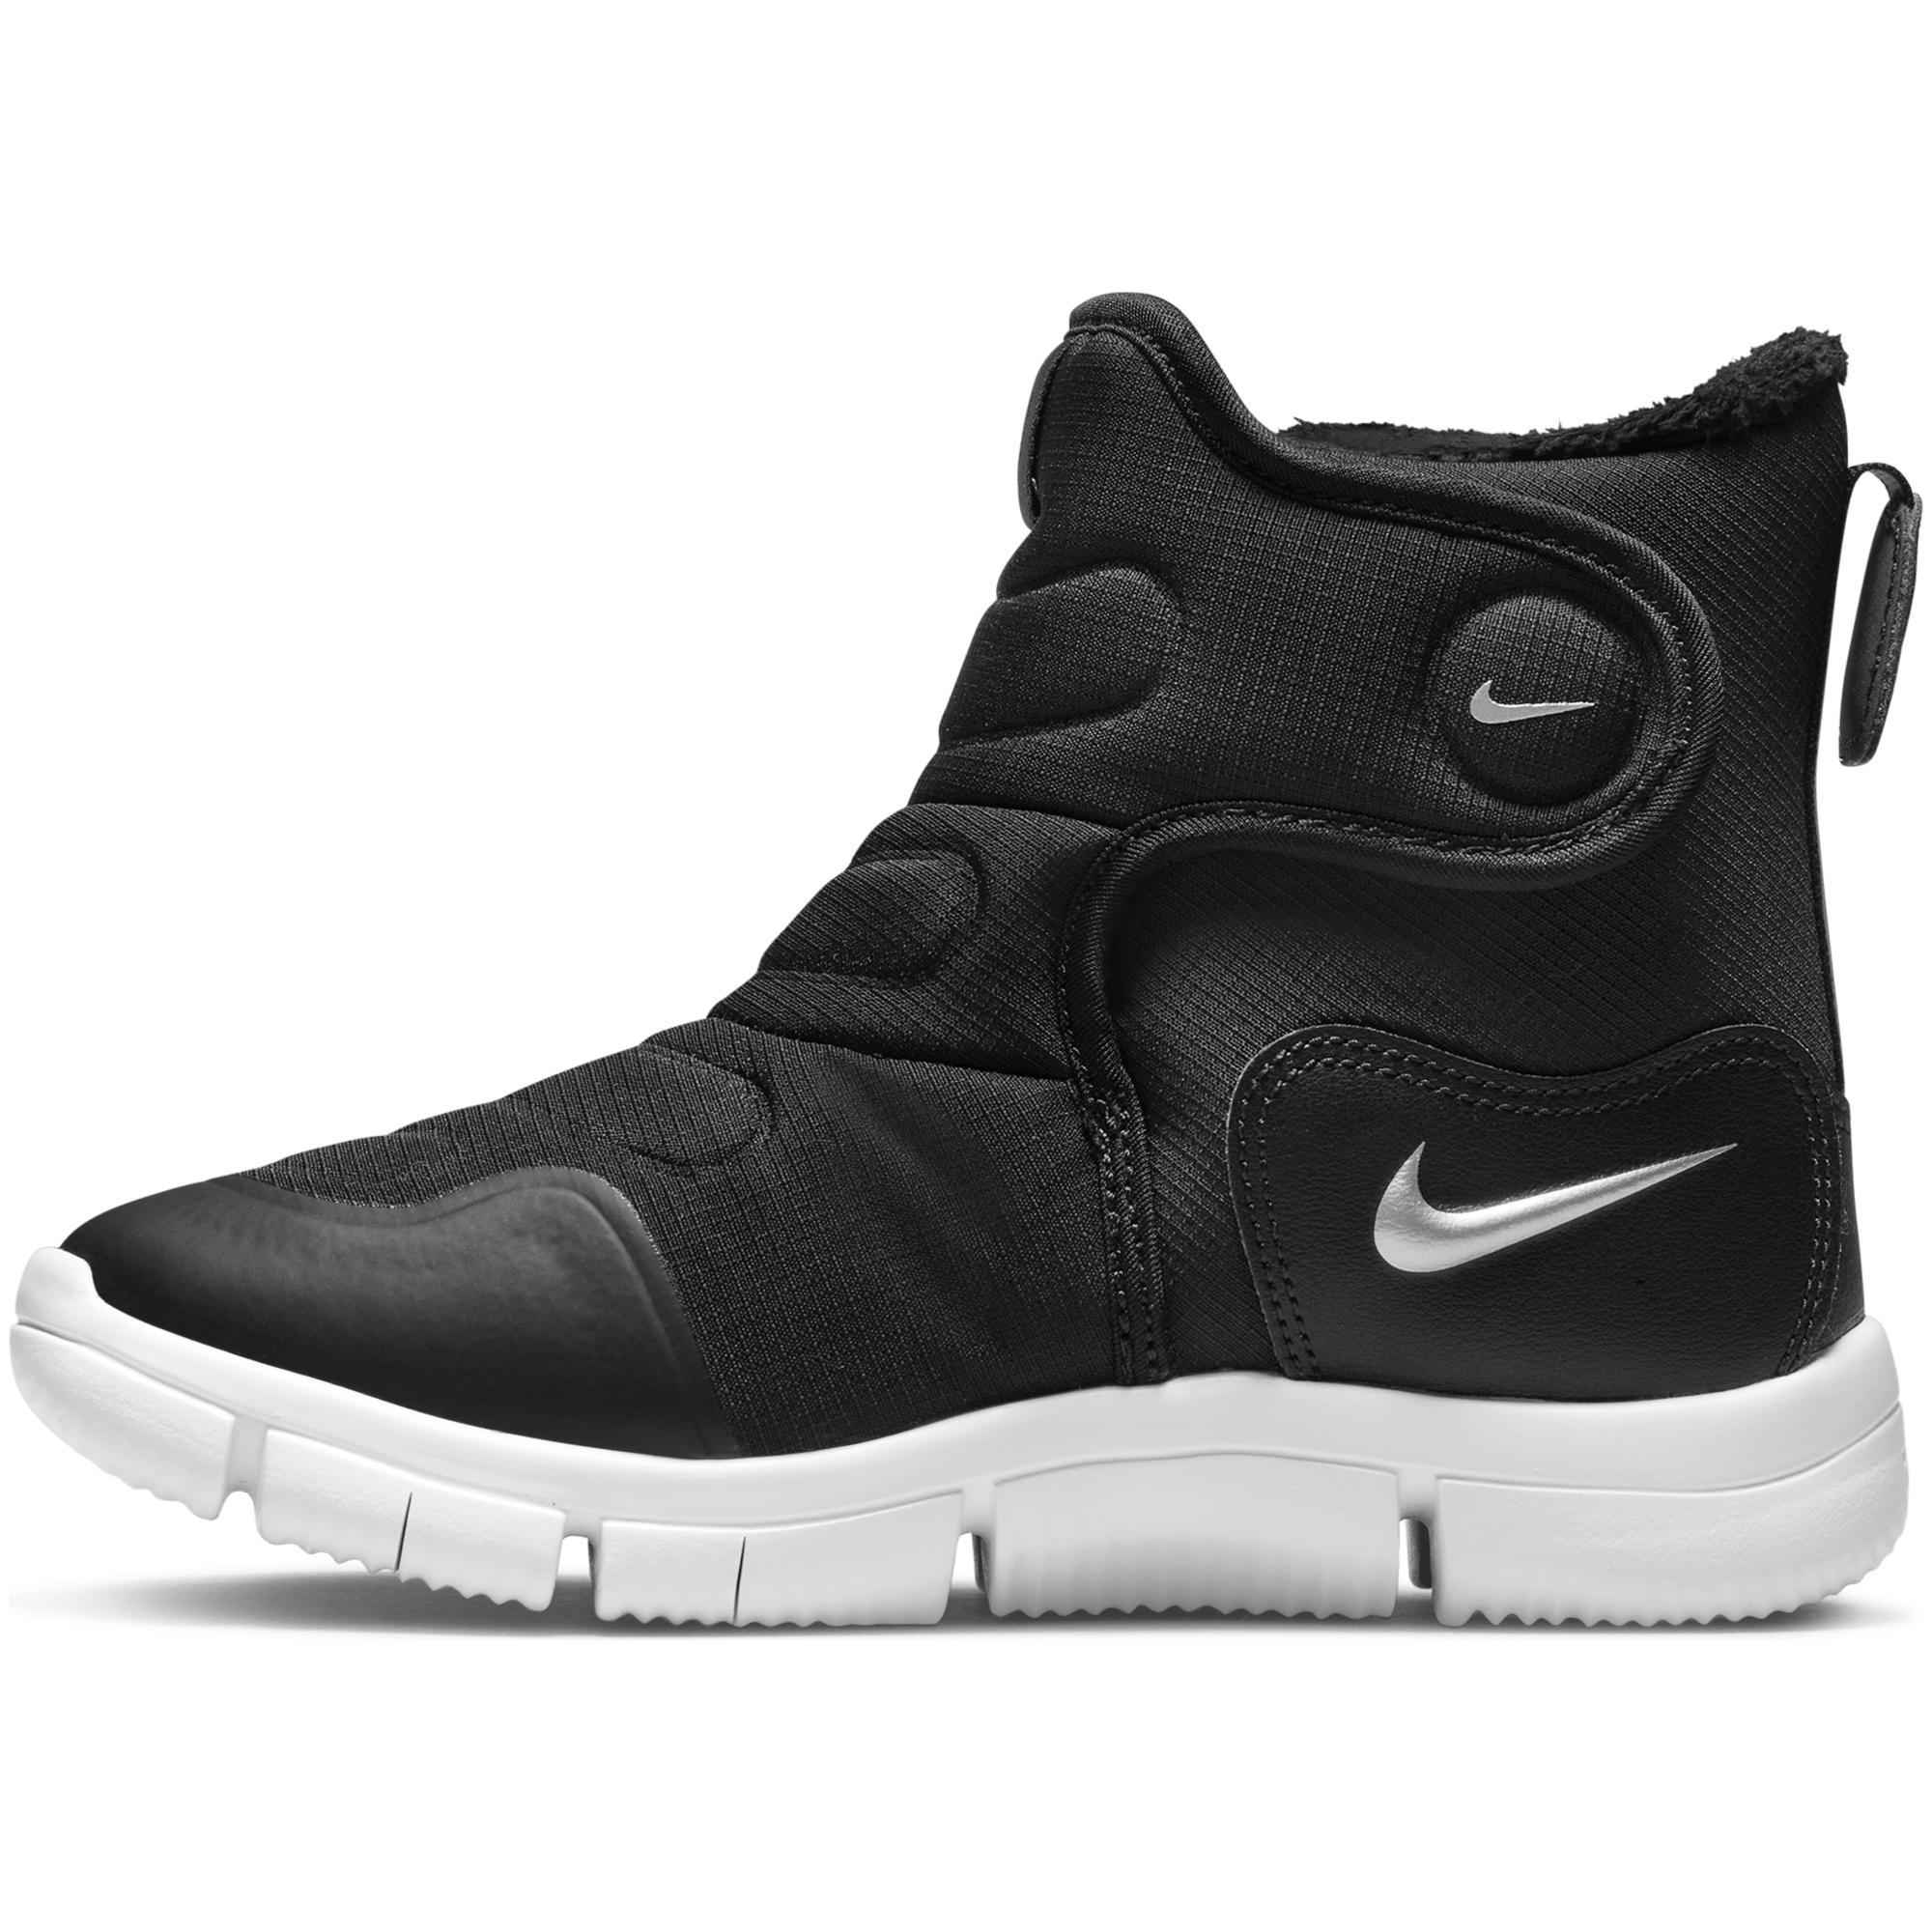 Sneaker boots, Shoe boots, Nike free shoes